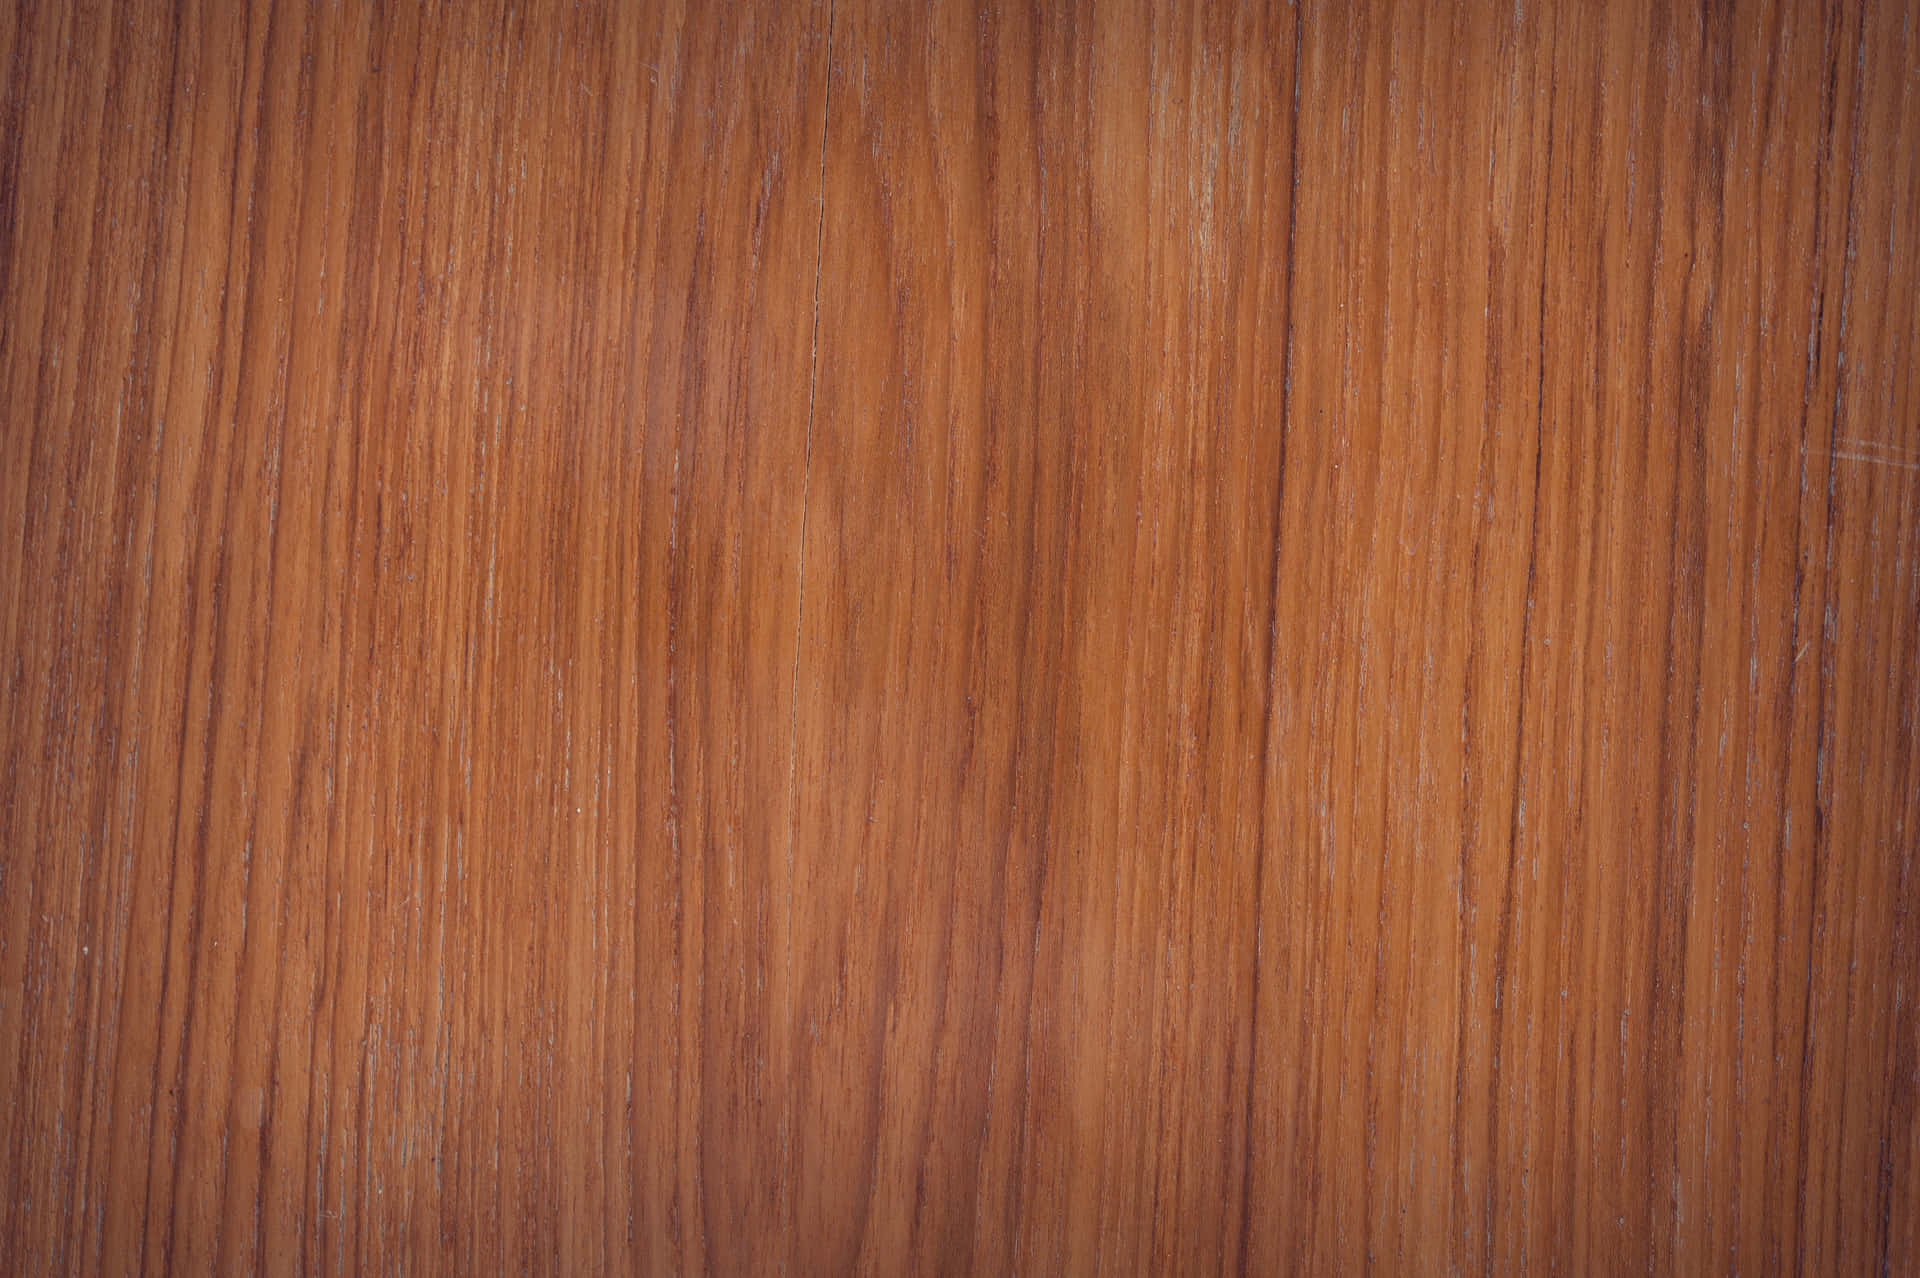 Natural looking wooden plank background